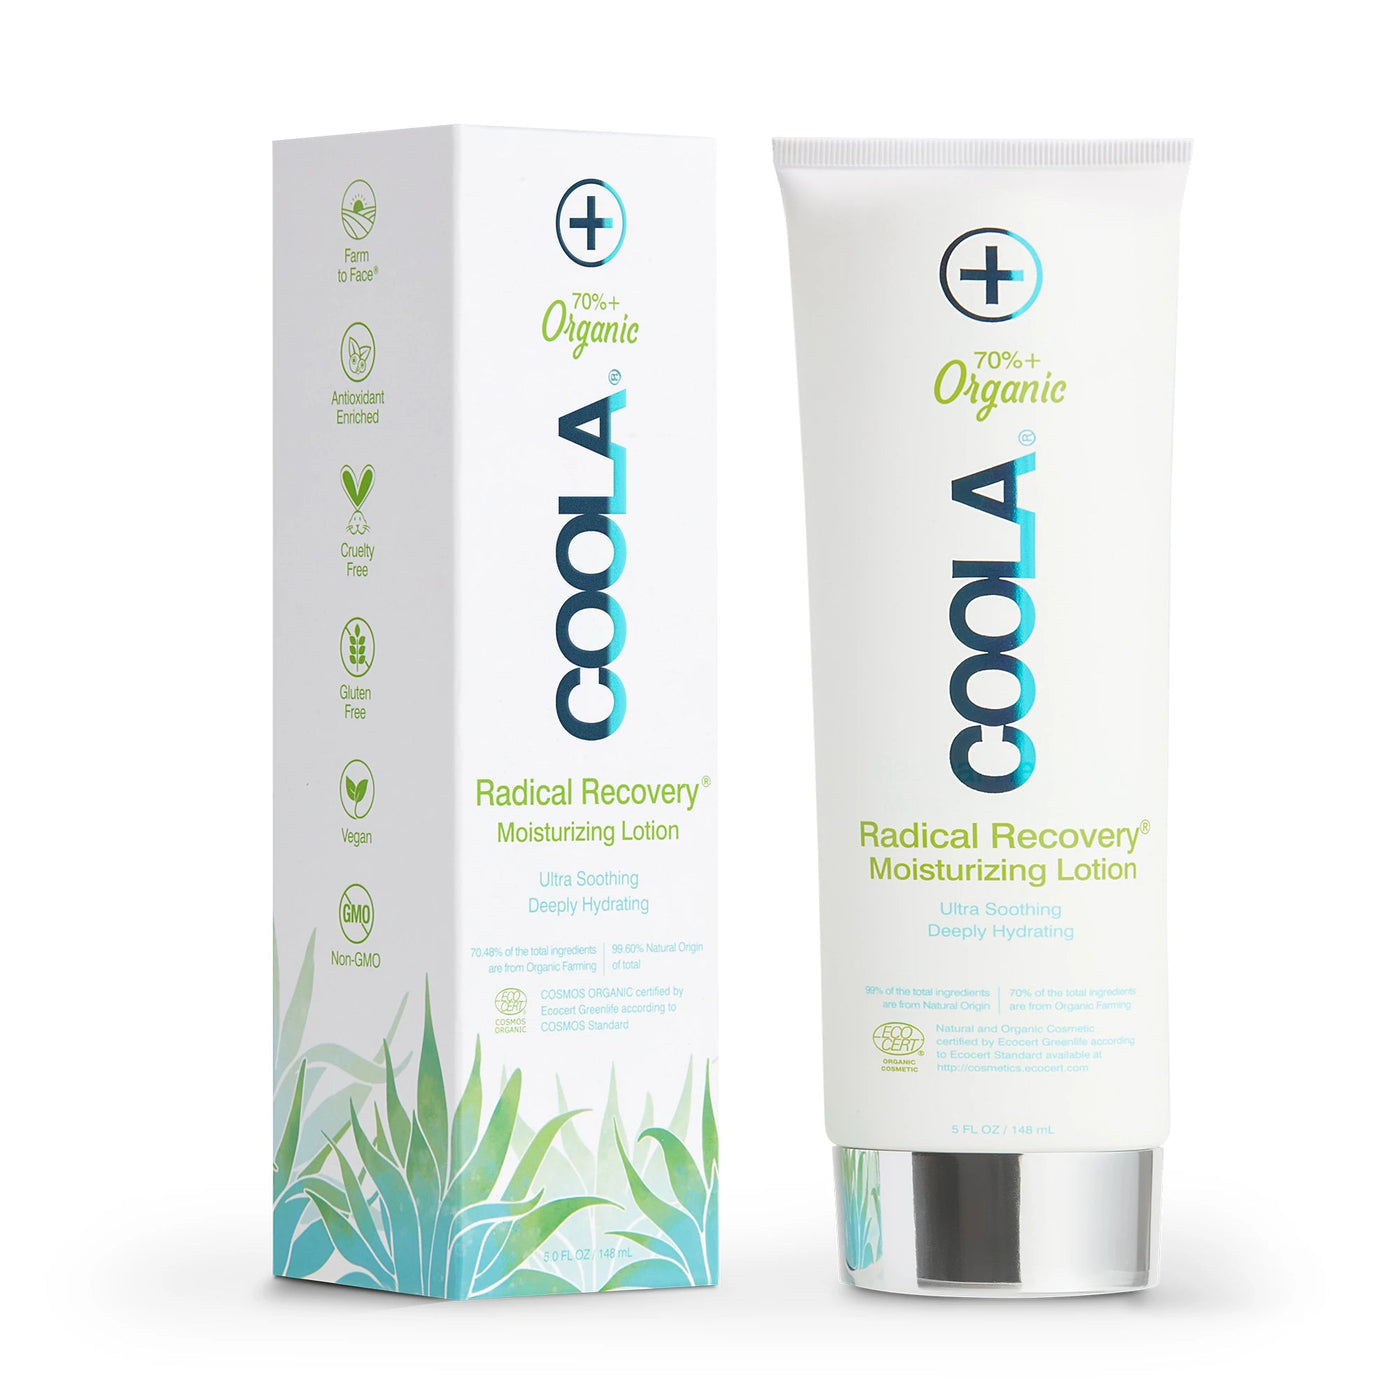 RADICAL RECOVERY ECO-CERT ORGANIC AFTER SUN LOTION | After Sun | LOSHEN & CREM